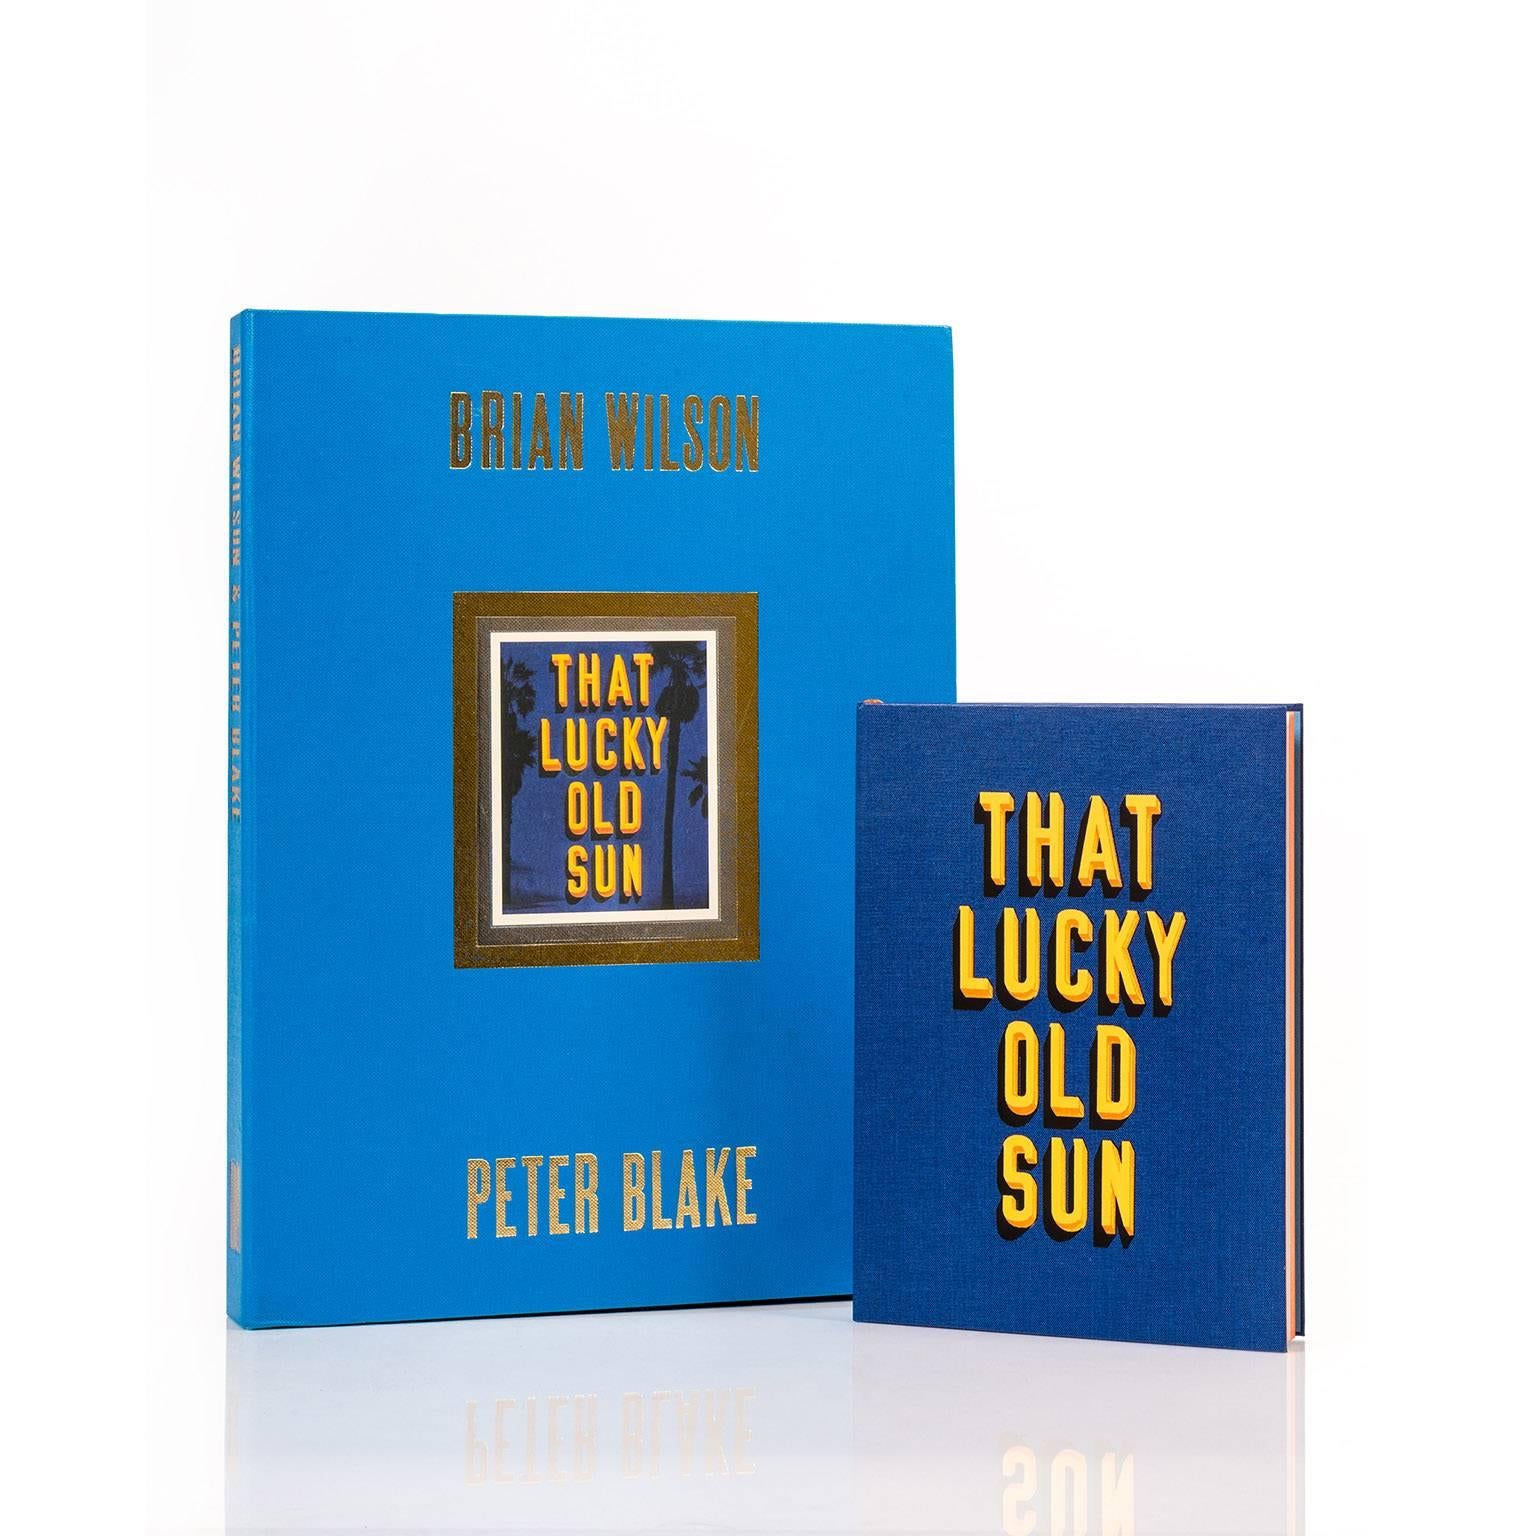 That Lucky Old Sun is a limited edition boxed set which consists; a handmade book, CD, facsimile music sheets, lyrics and a set of 12 original fine art prints signed by Brian Wilson and Sir Peter Blake. The fine art boxed set was inspired by the